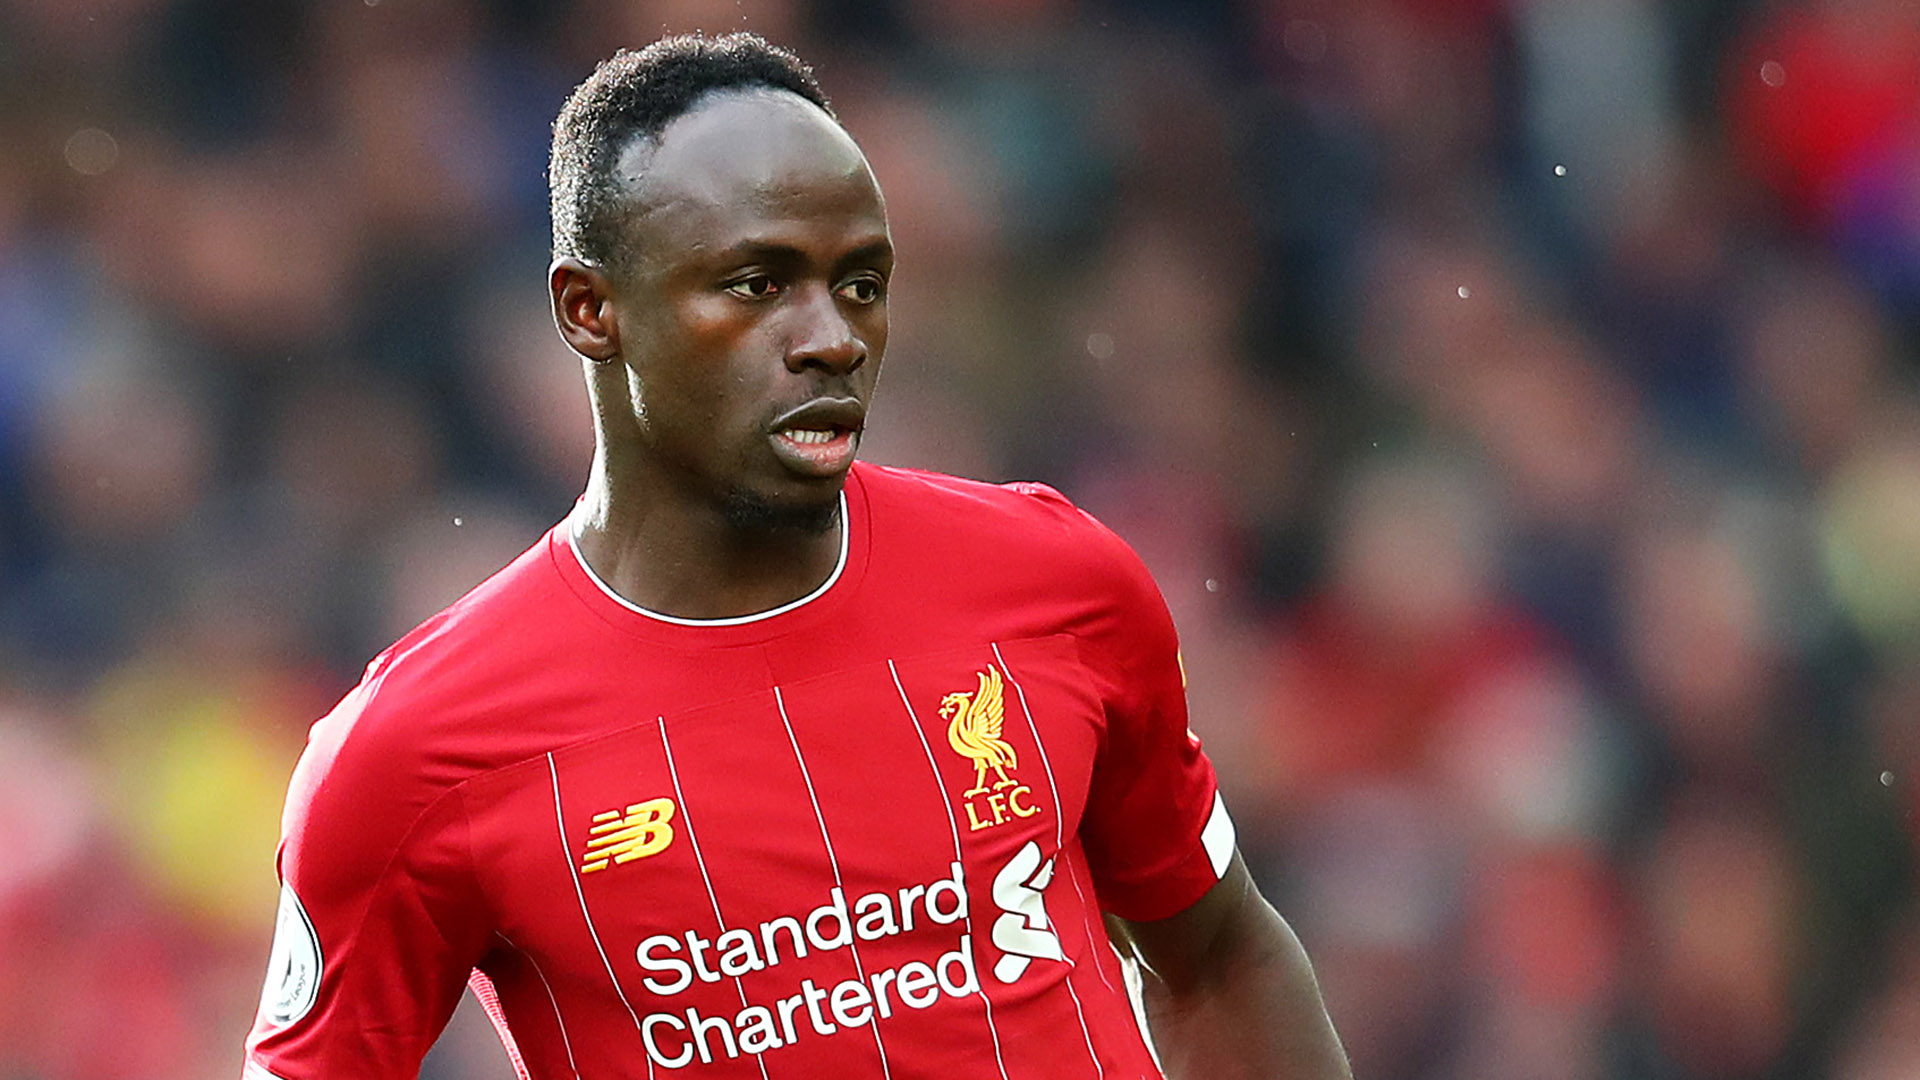 Liverpool icon Jason McAteer warns Reds they could lose Sadio Mane to Real Madrid - Bóng Đá